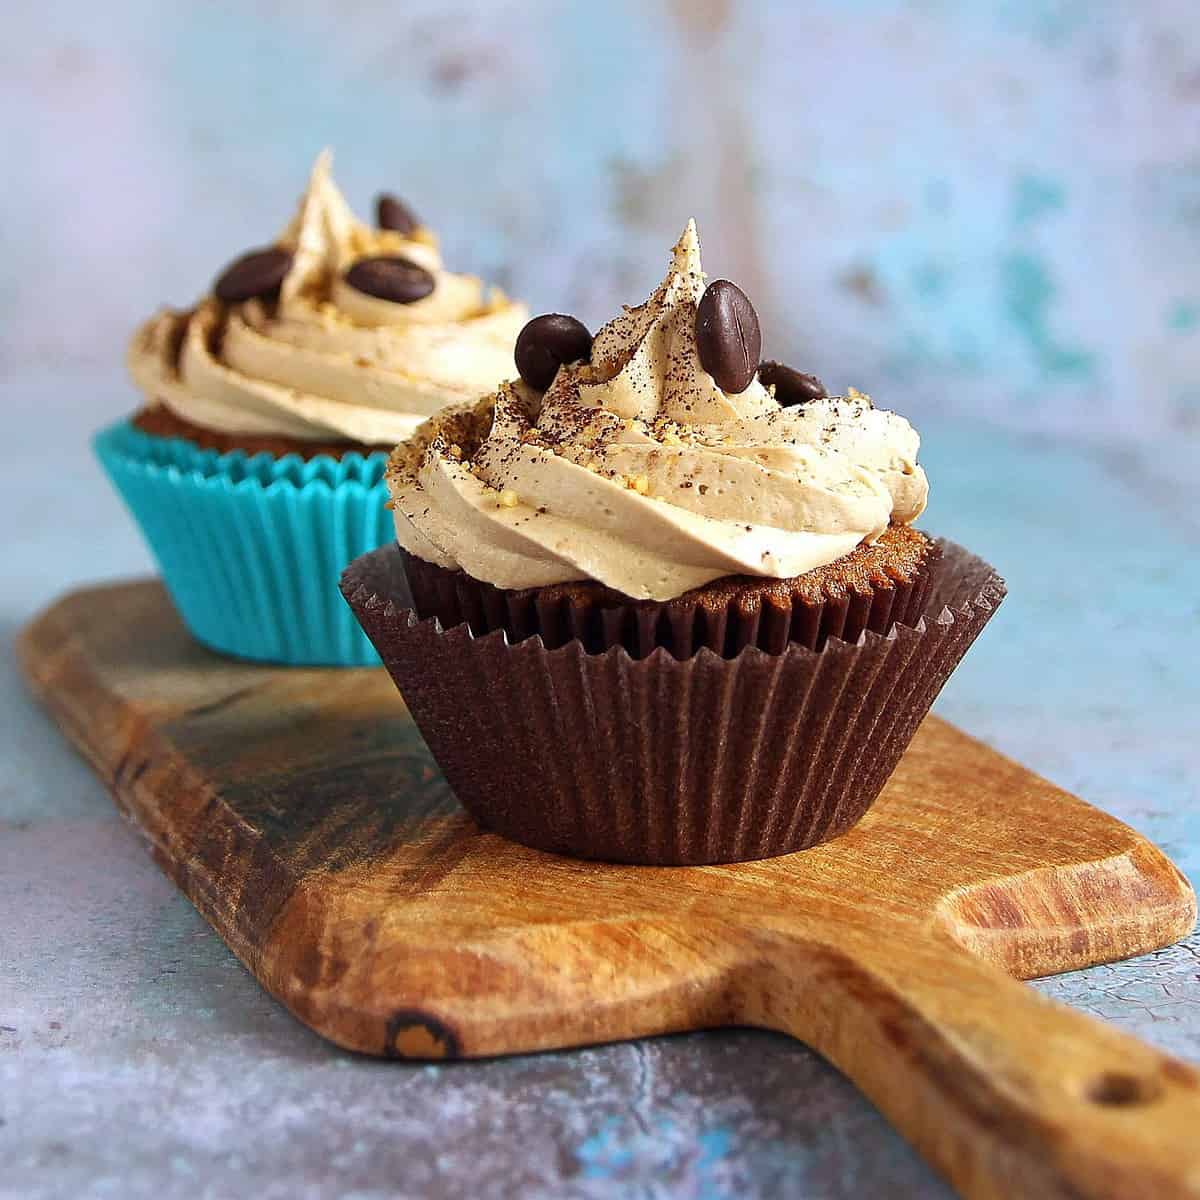  With just the right balance of flavors and textures, these cupcakes are sure to be a hit at your next gathering.